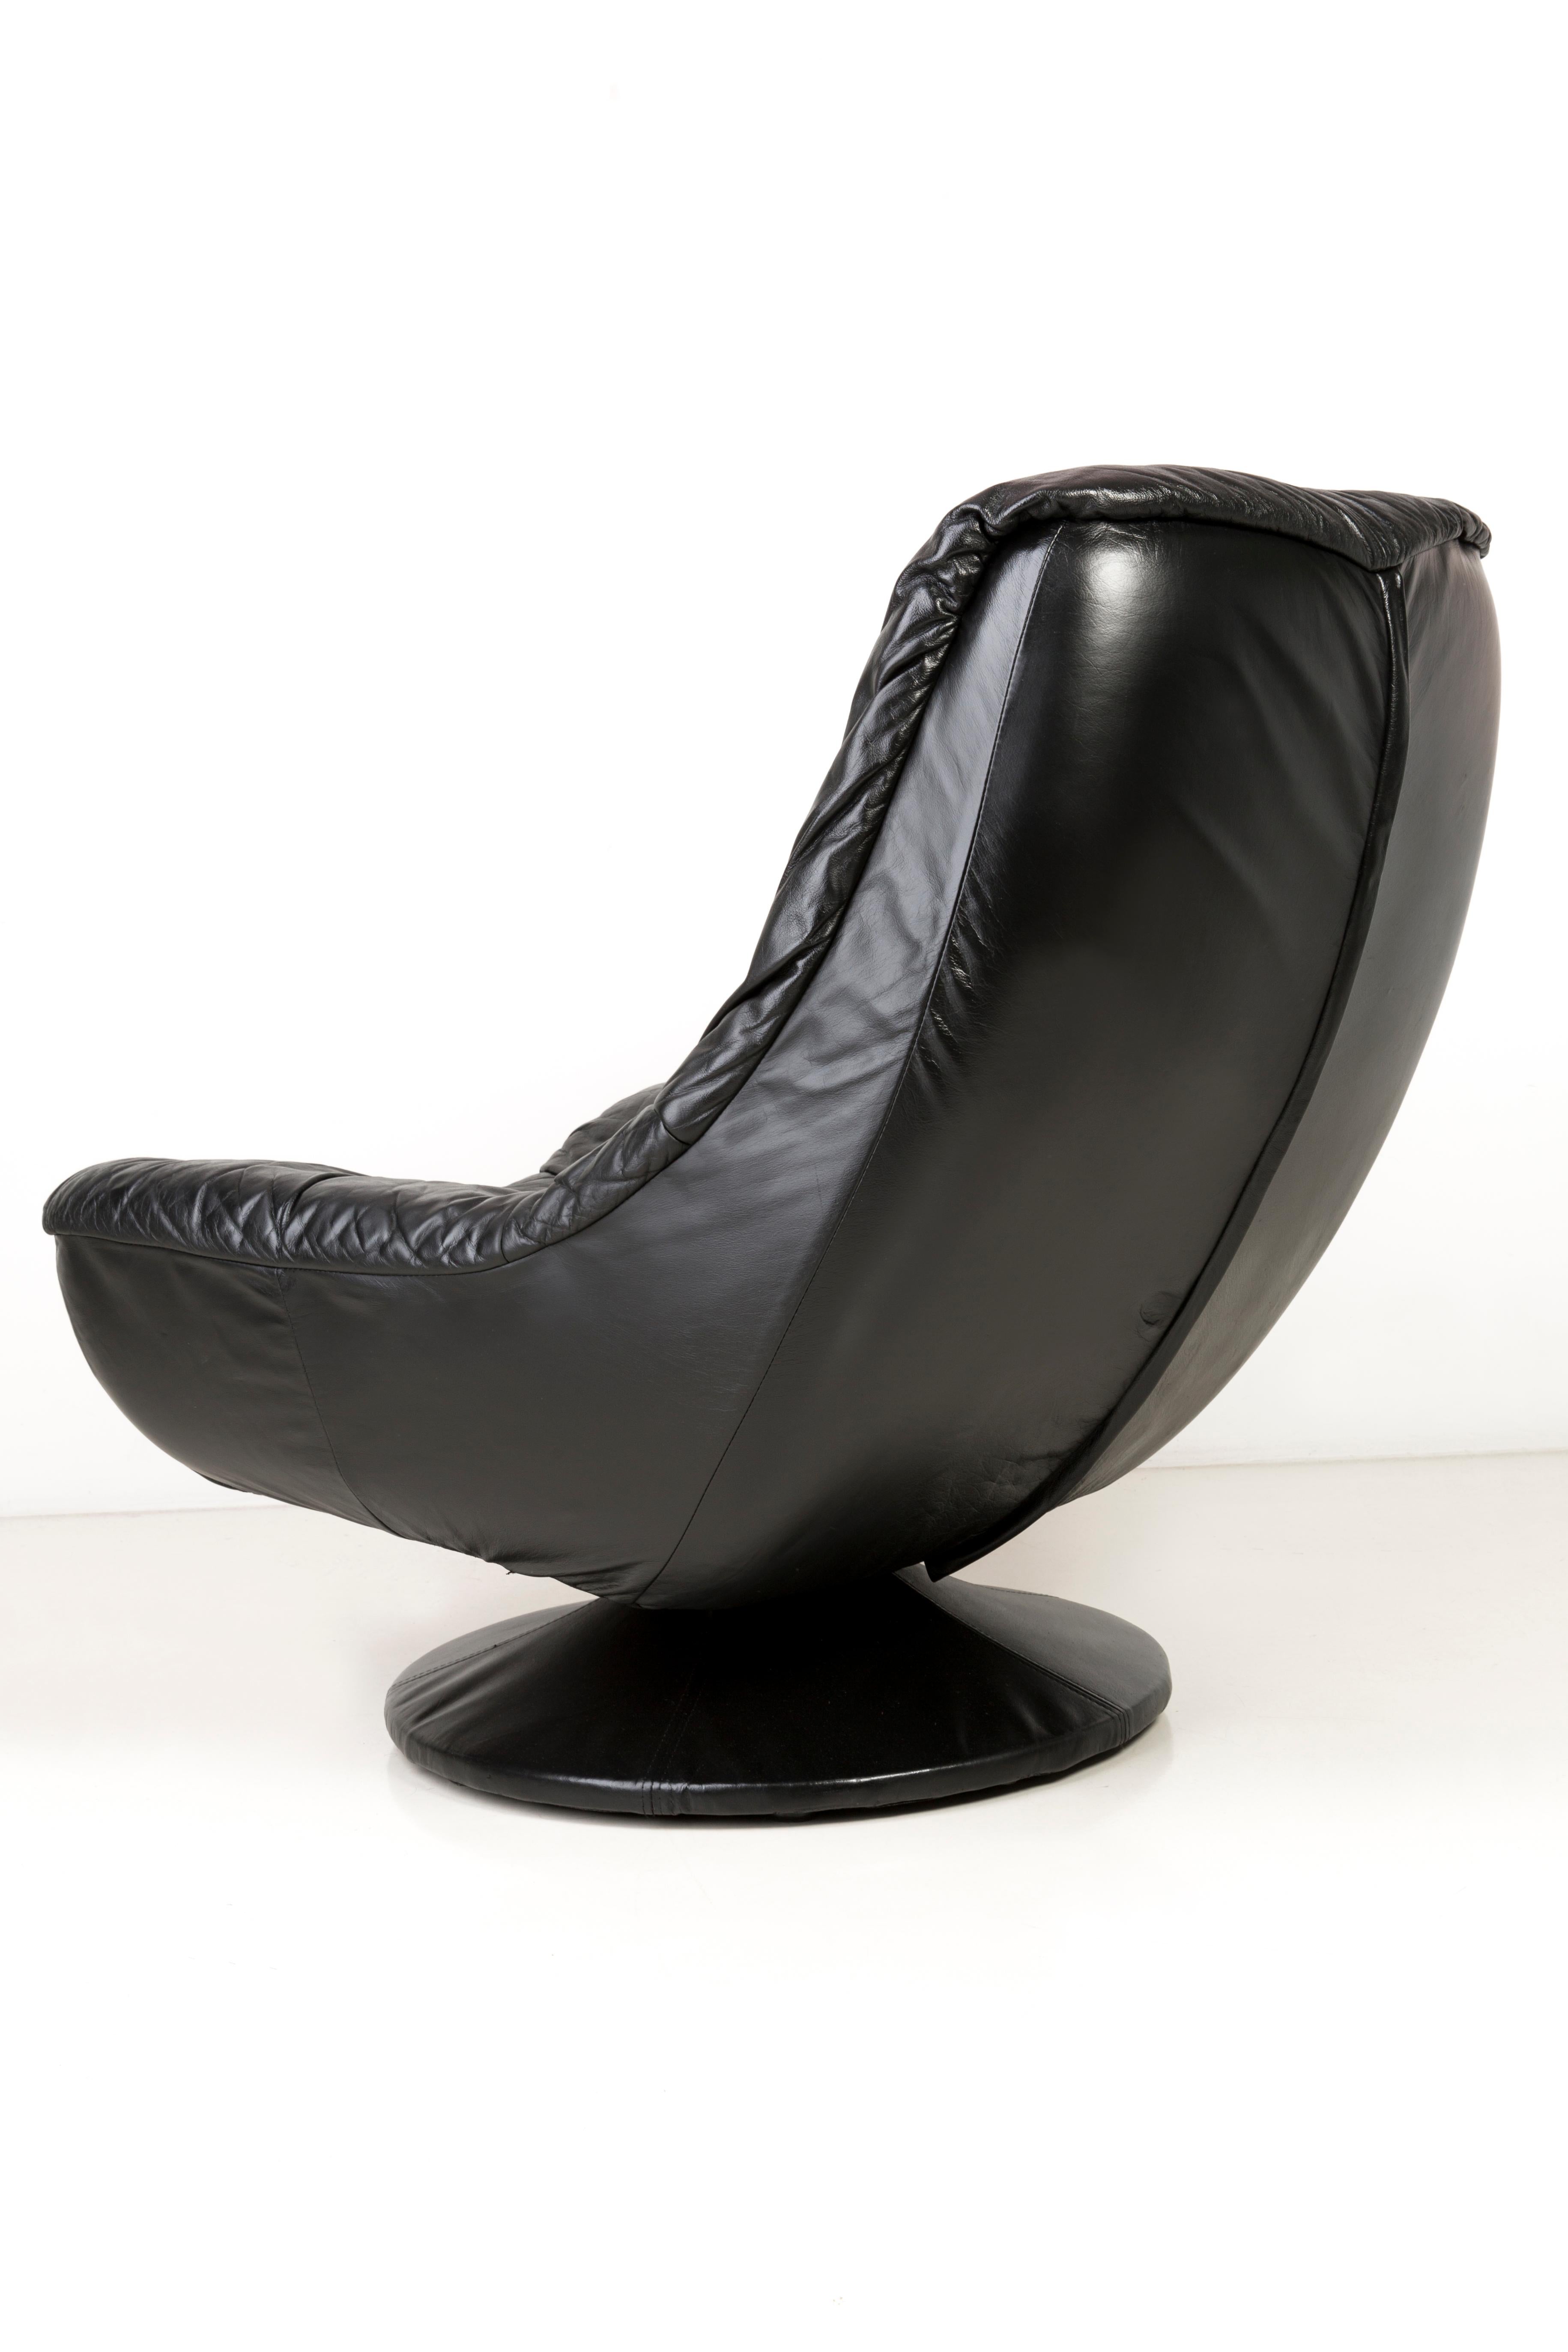 Hand-Crafted 20th Century Vintage Black Soft Leather Swivel Armchair, Italy, 1960s For Sale